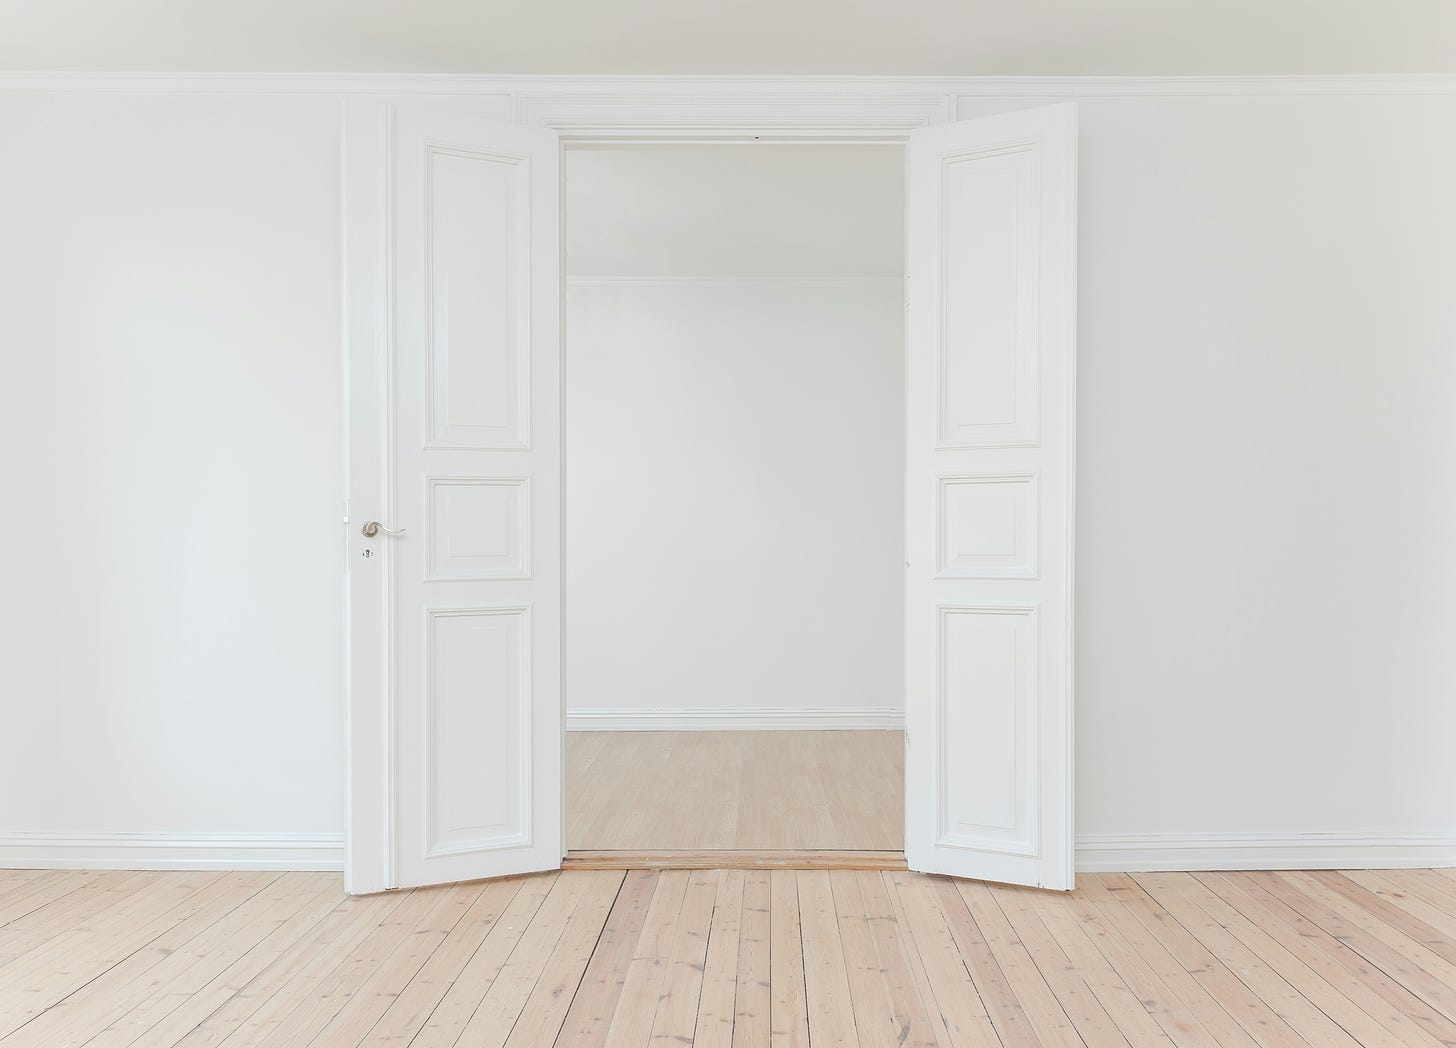 A doorway with two white according doors leading from one space with a wood floor to another. There is a raised bump at the boundary between the two rooms.